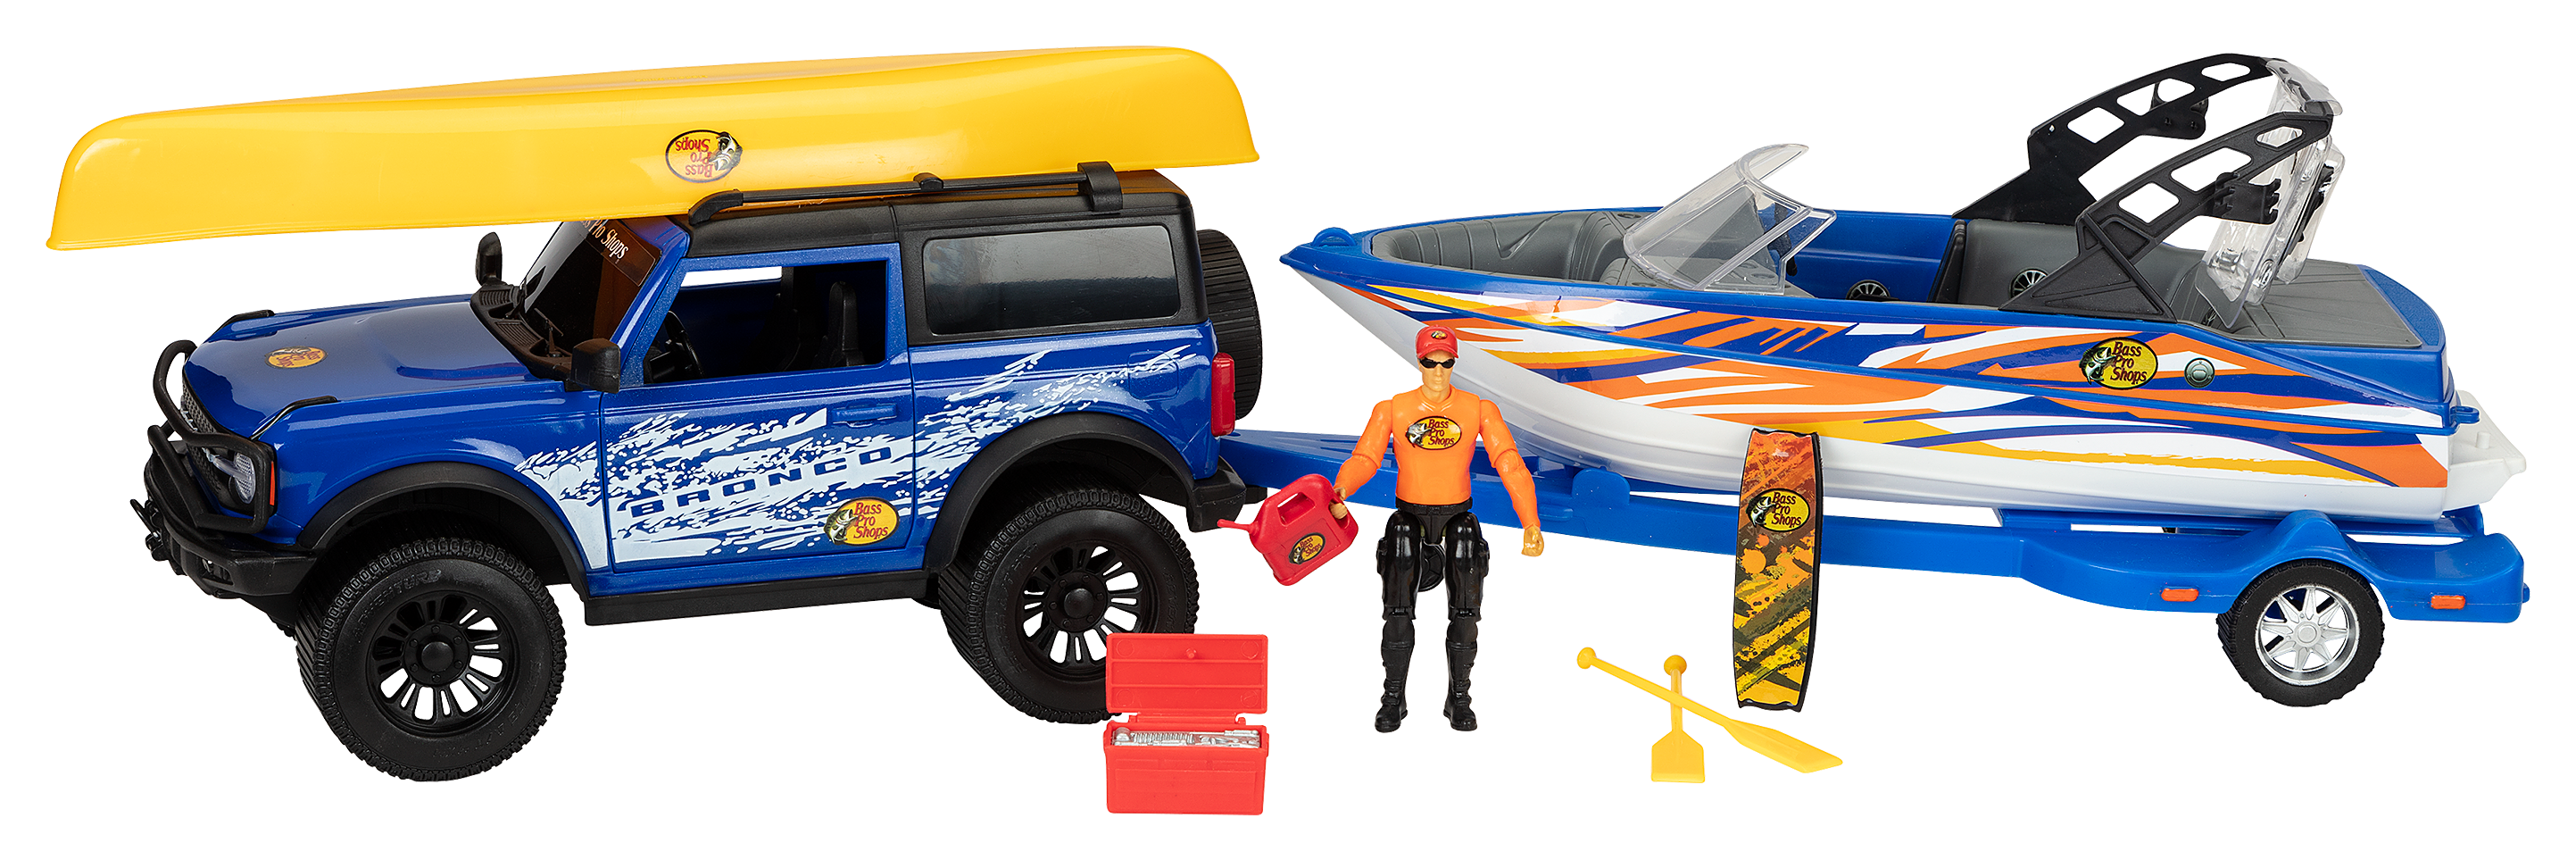 Bass Pro Shops Deluxe Ford Bronco Wake Boat Adventure Play Set